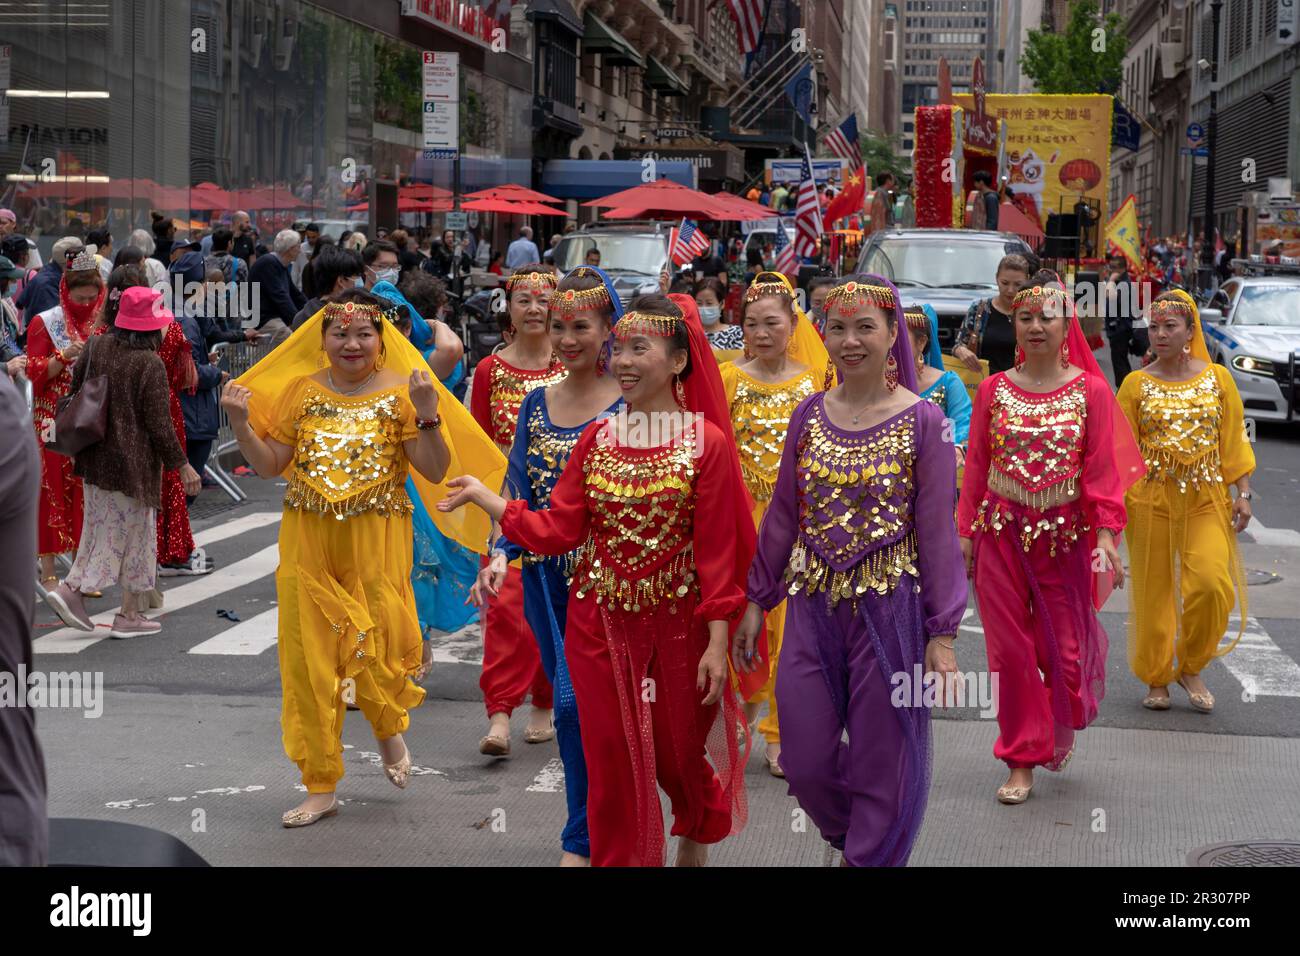 New York, United States. 21st May, 2023. NEW YORK, NEW YORK - MAY 21: Participants from the New York Brooklyn Dance Club perform during the New York City Second Annual Asian American and Pacific Islander (AAPI) Cultural Heritage Parade on May 21, 2023 in New York City. Credit: Ron Adar/Alamy Live News Stock Photo